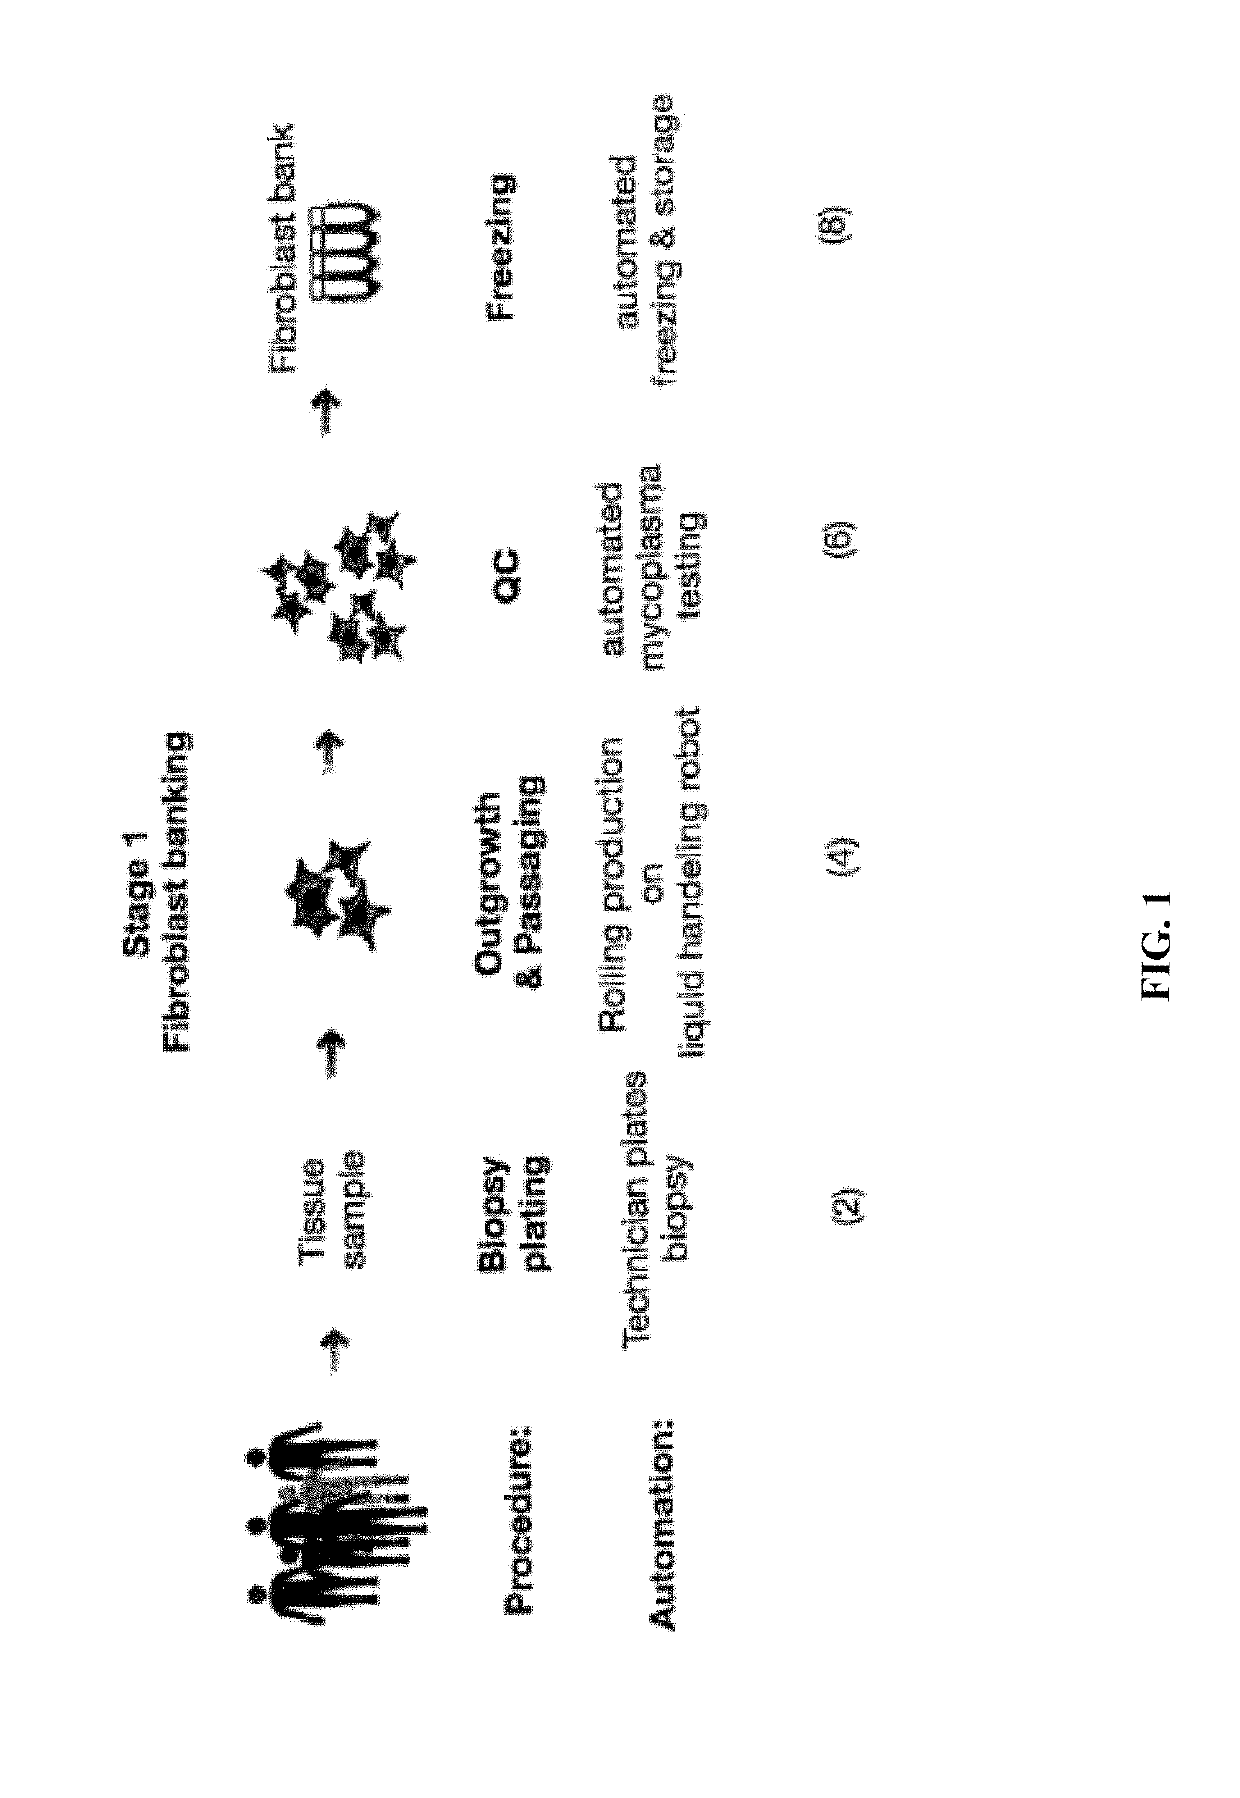 Automated system for producing induced pluripotent stem cells or differentiated cells